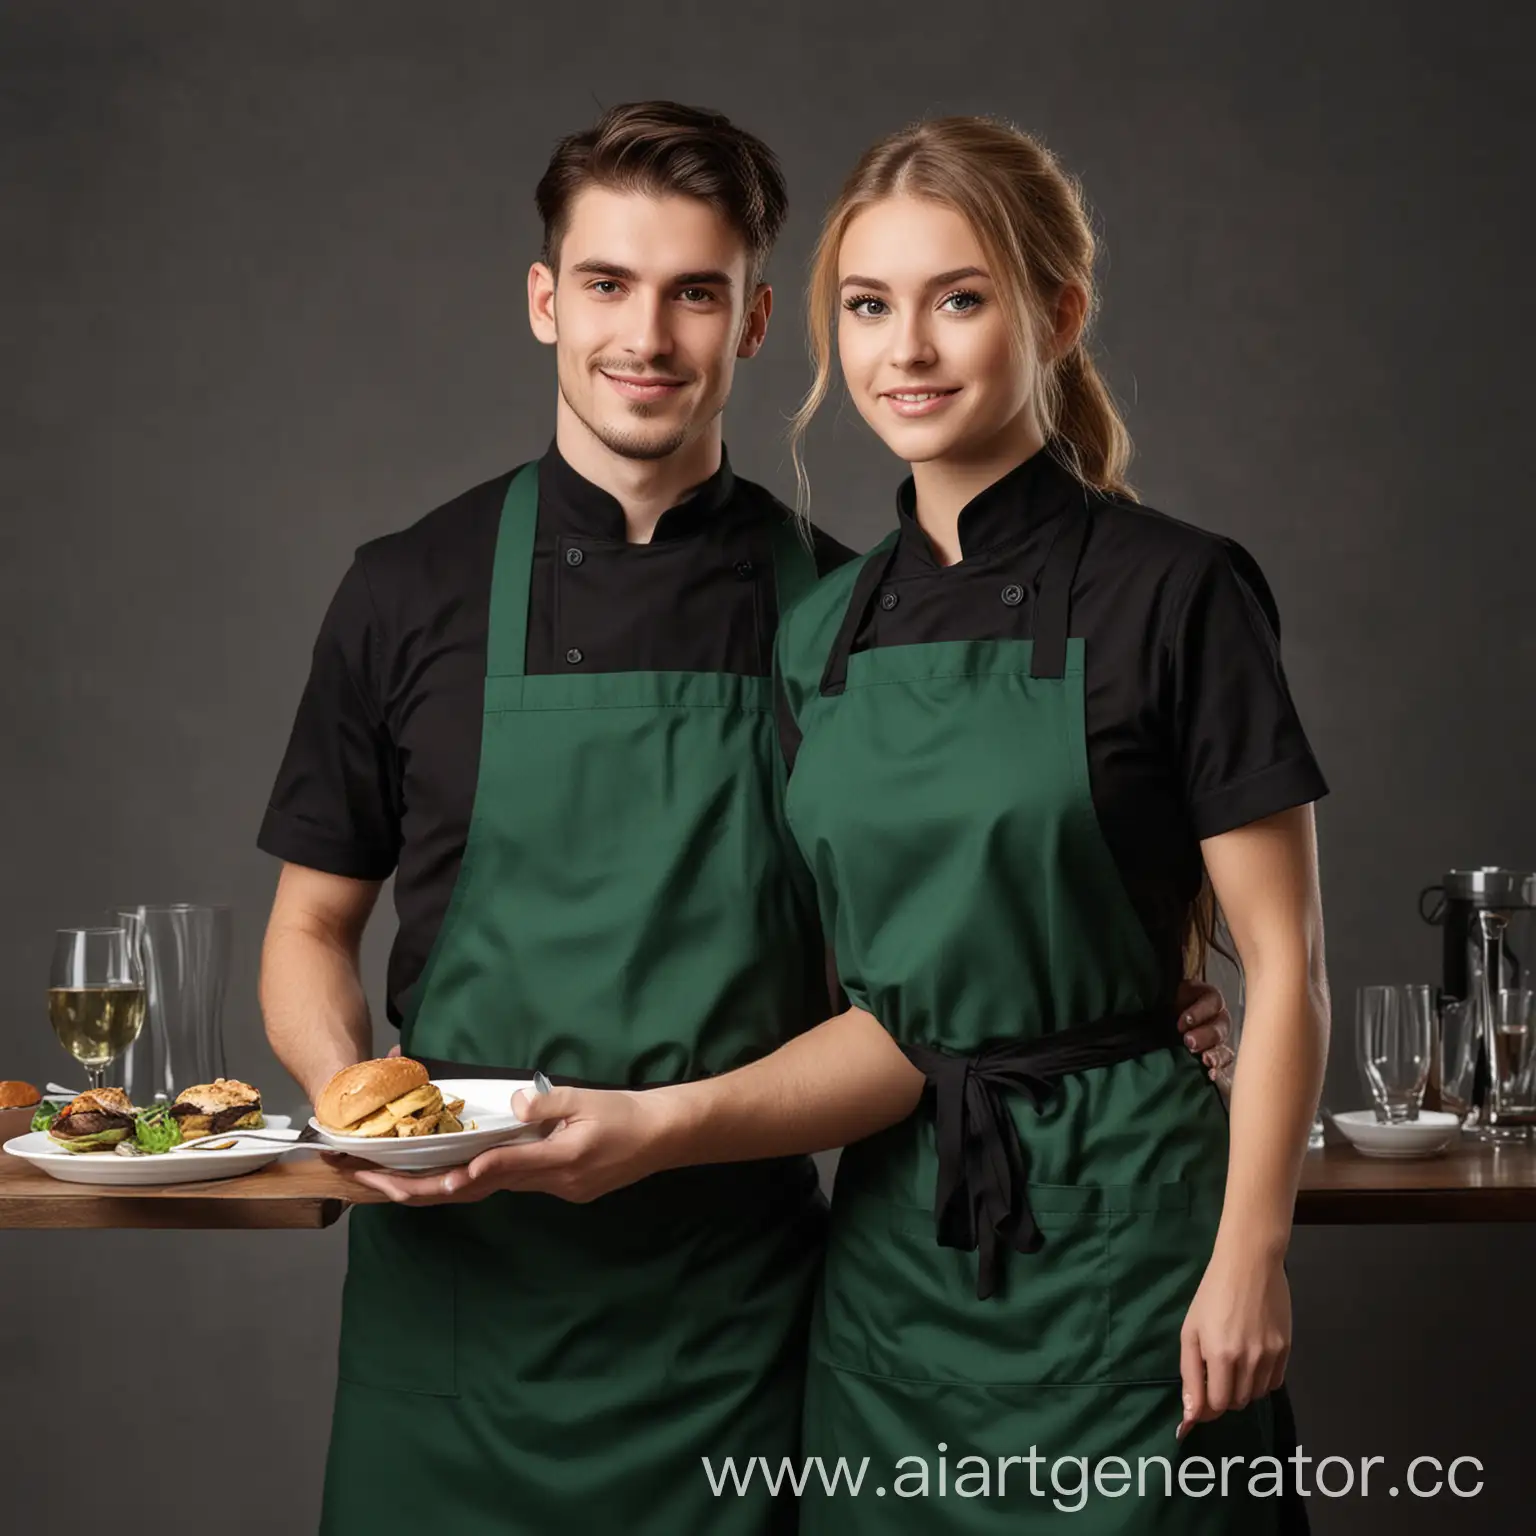 Elegant-Waiter-and-Waitress-Serving-in-Matching-DarkGreen-Uniforms-and-Black-Aprons